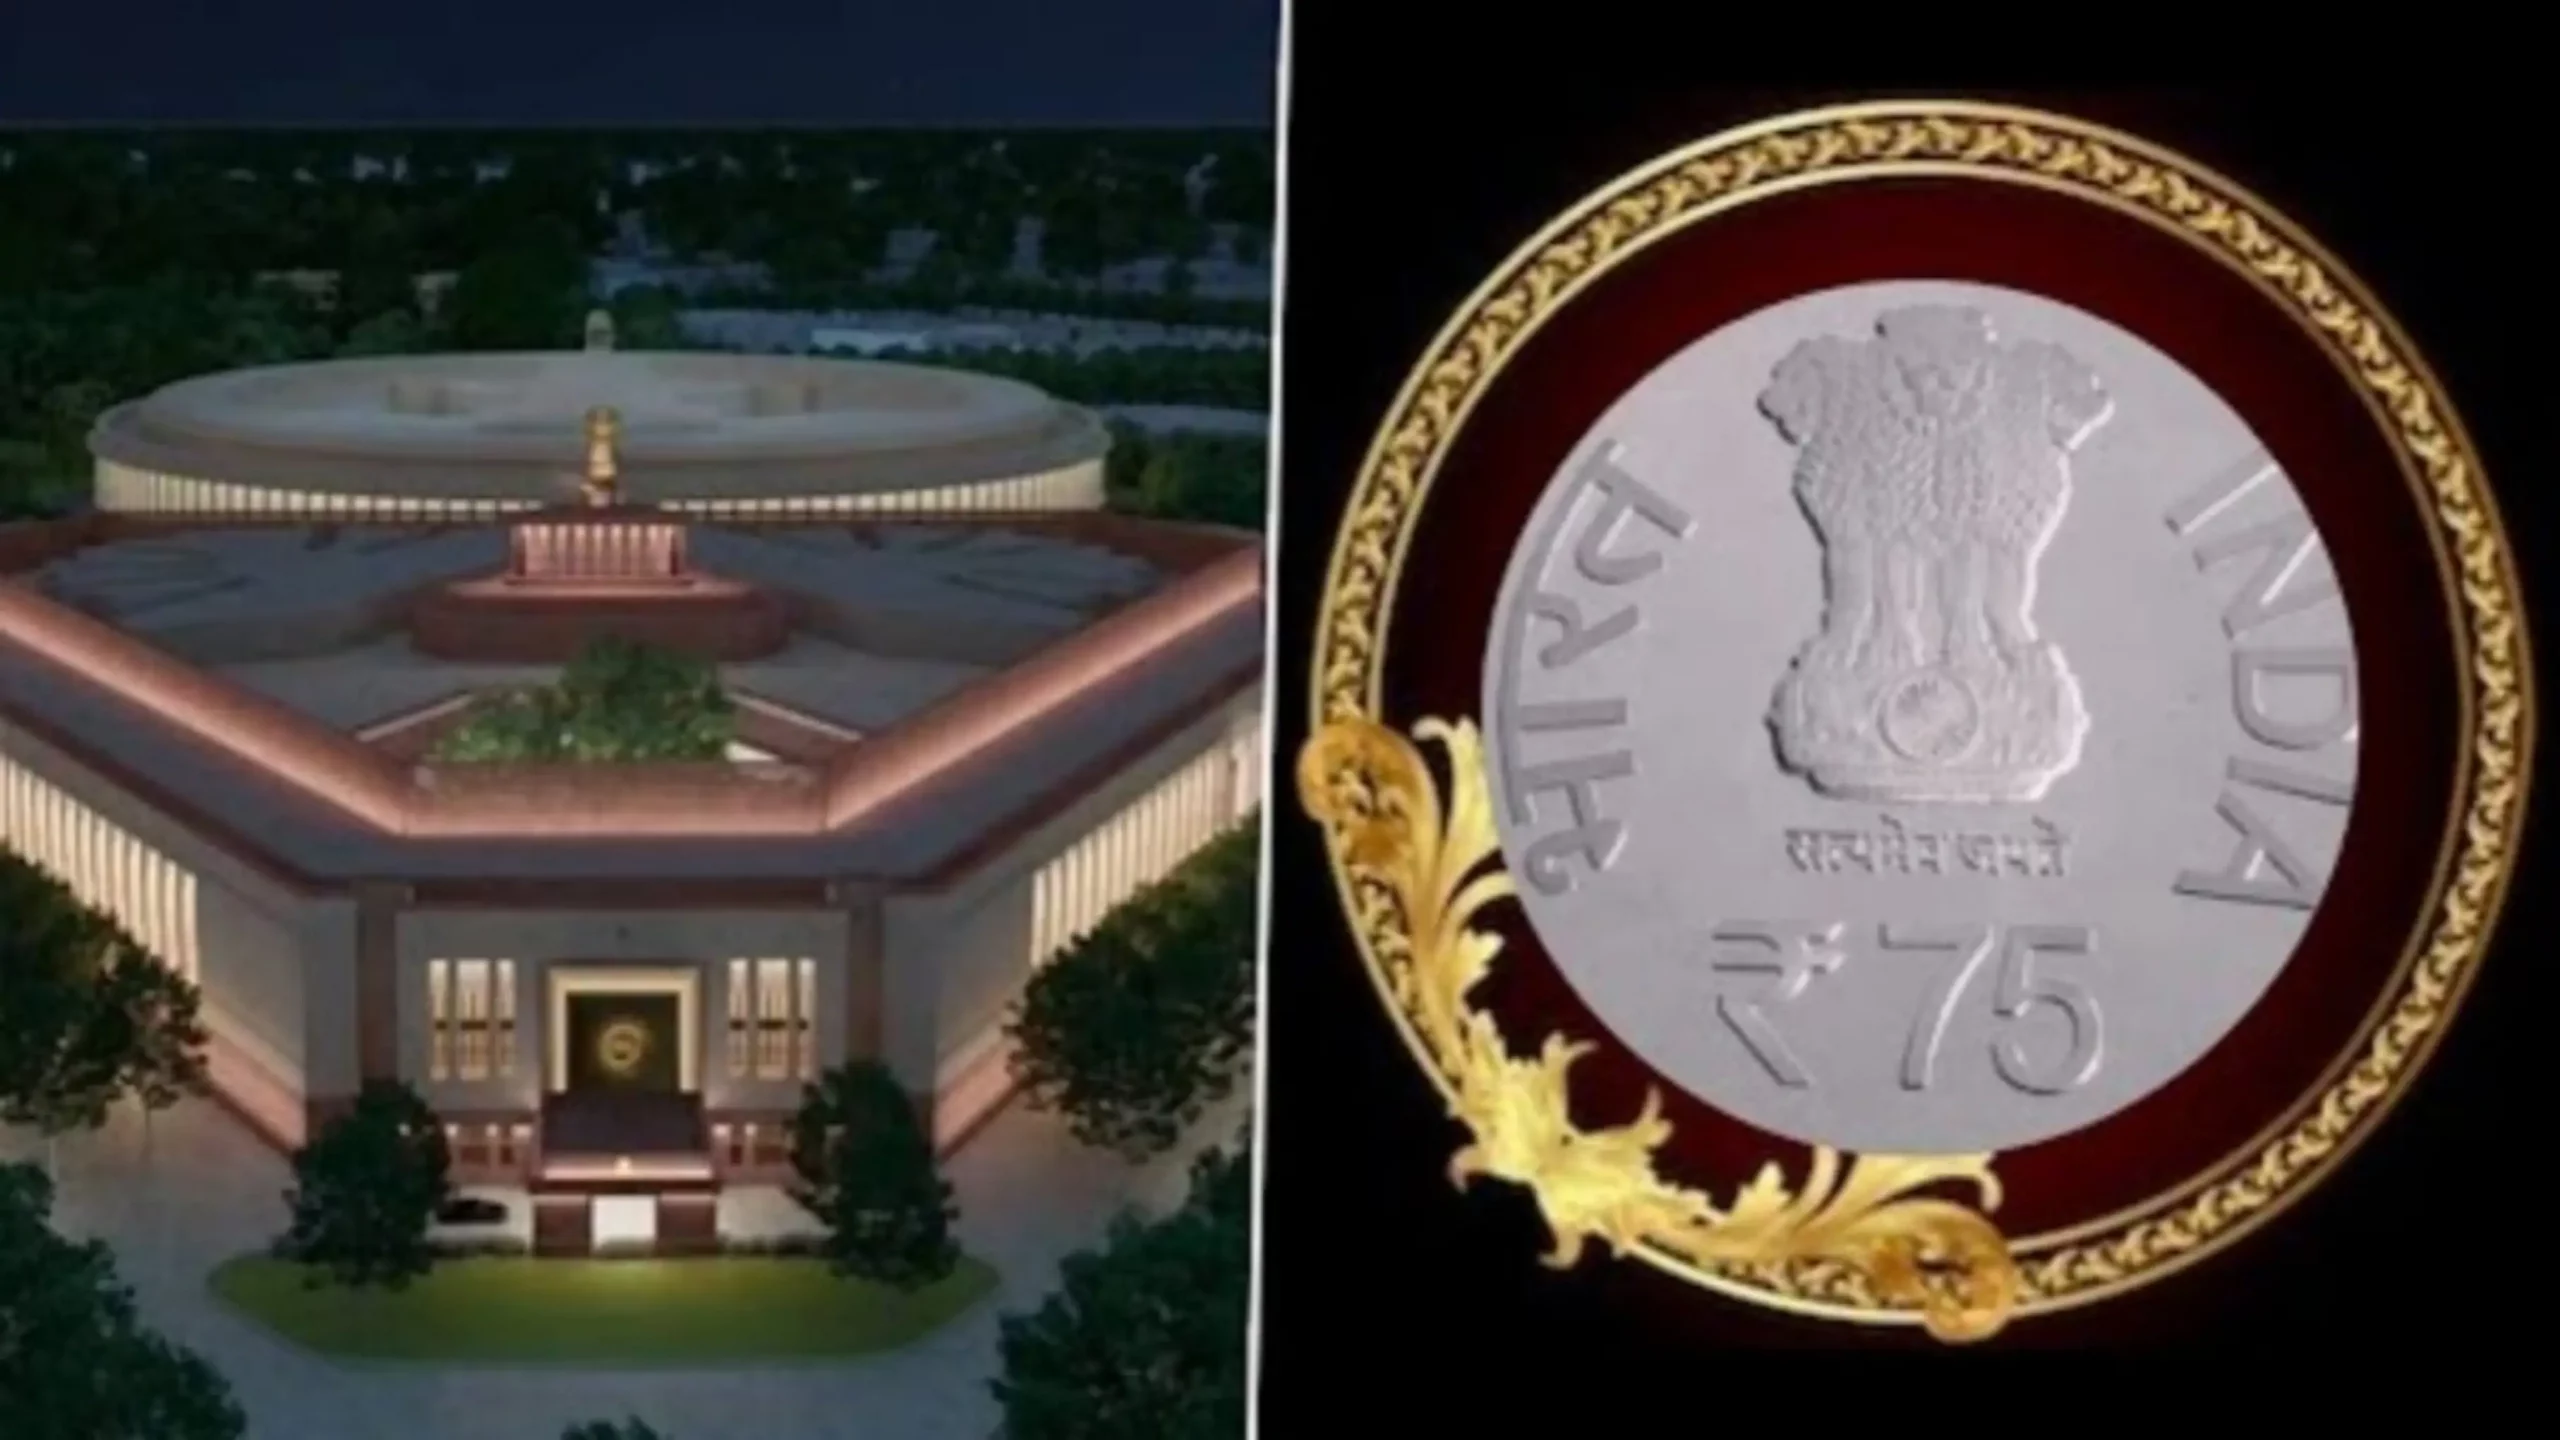 75 rupees coin will be released in the inauguration of new parliament house